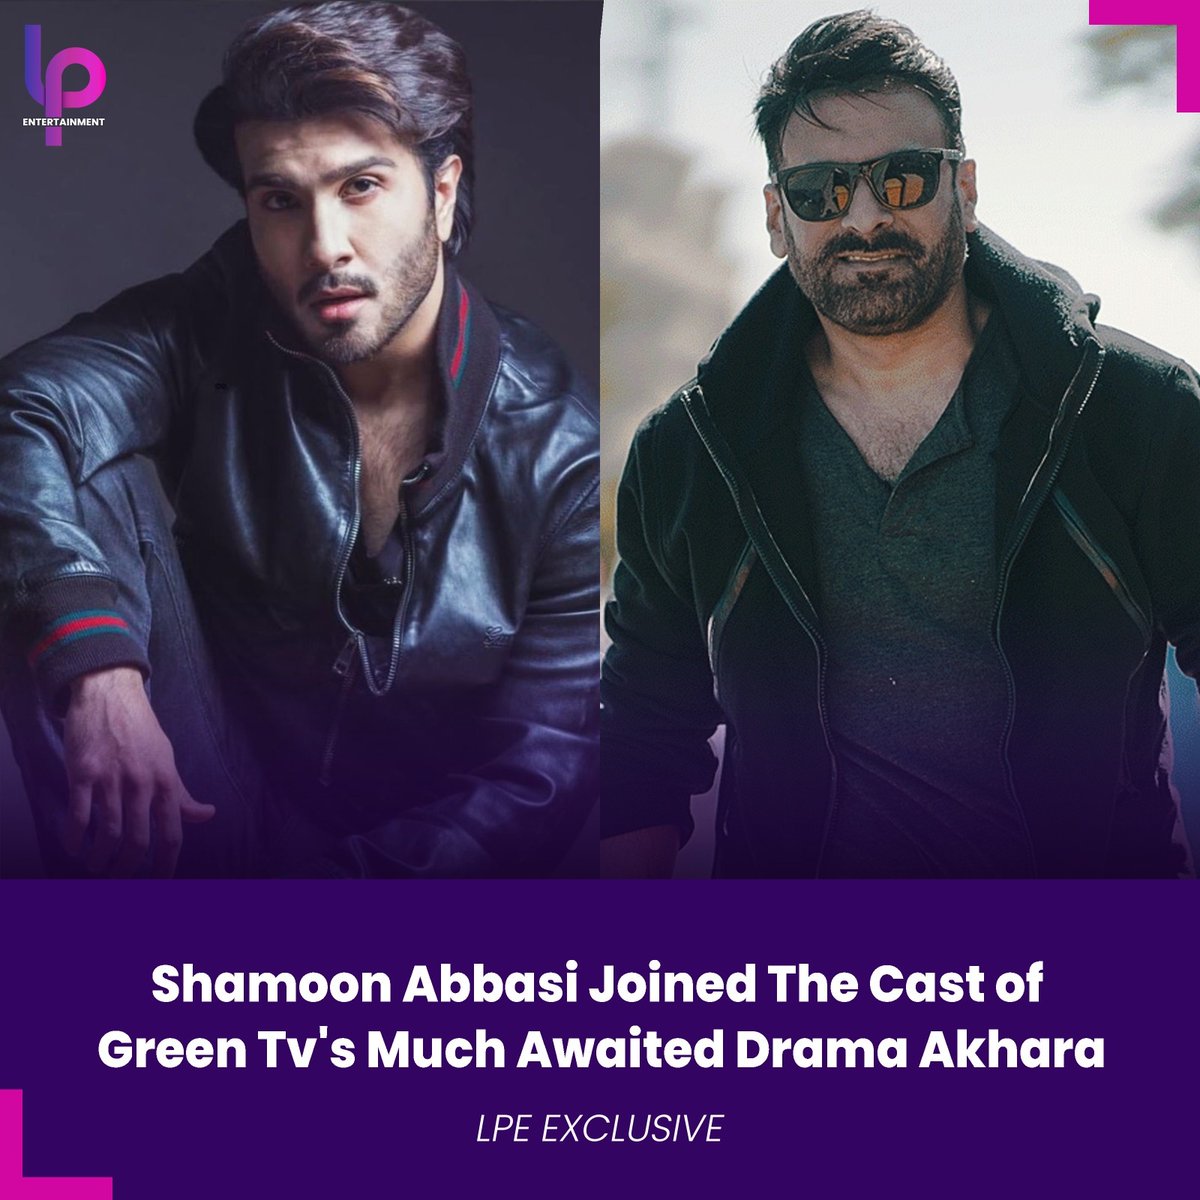 #Exclusive
Shamoon Abbasi joined Green Entertainment's upcoming drama serial Akhara. 
Other lead cast includes Feroze Khan, Hina Afridi, and Sonya Hussyn. 

#ShamoonAbbasi #FerozeKhan #HinaAfridi #LPEntertainment #PakistaniDramas #GreenEntertainment